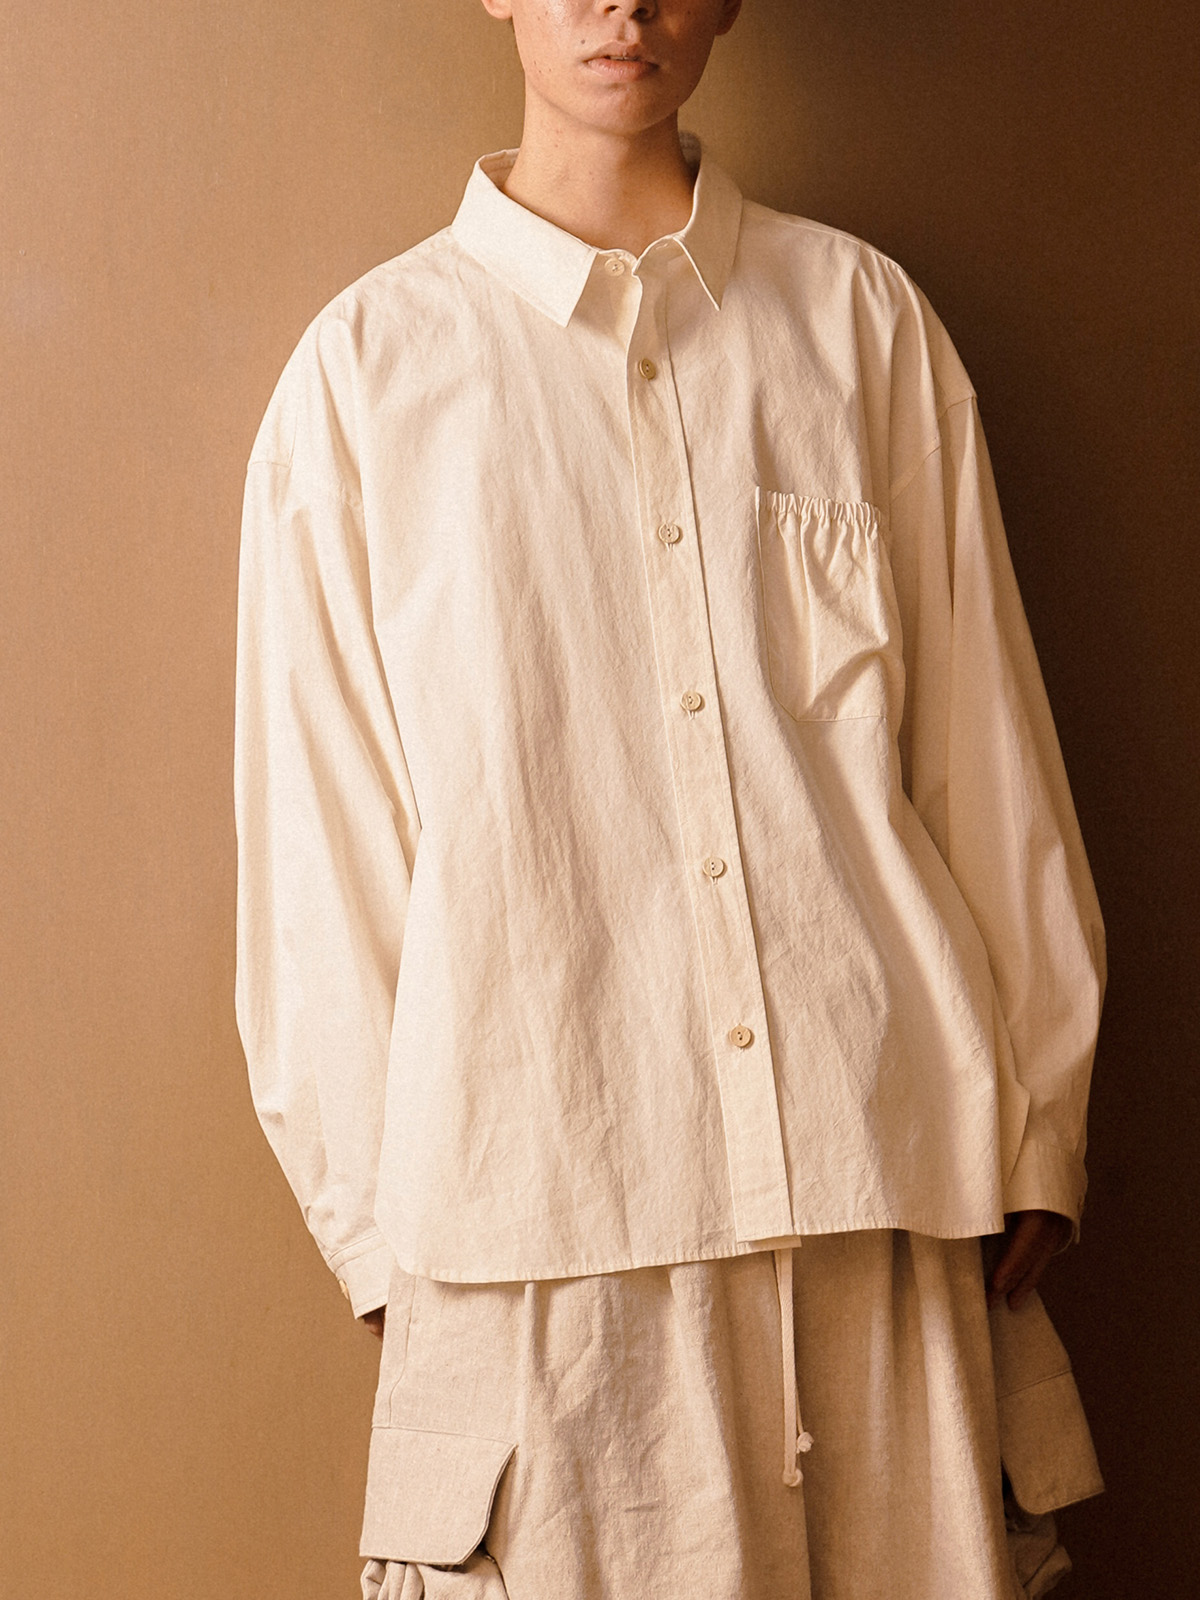 WRIST PATCH WIDE SHIRT OFF (WHITE)